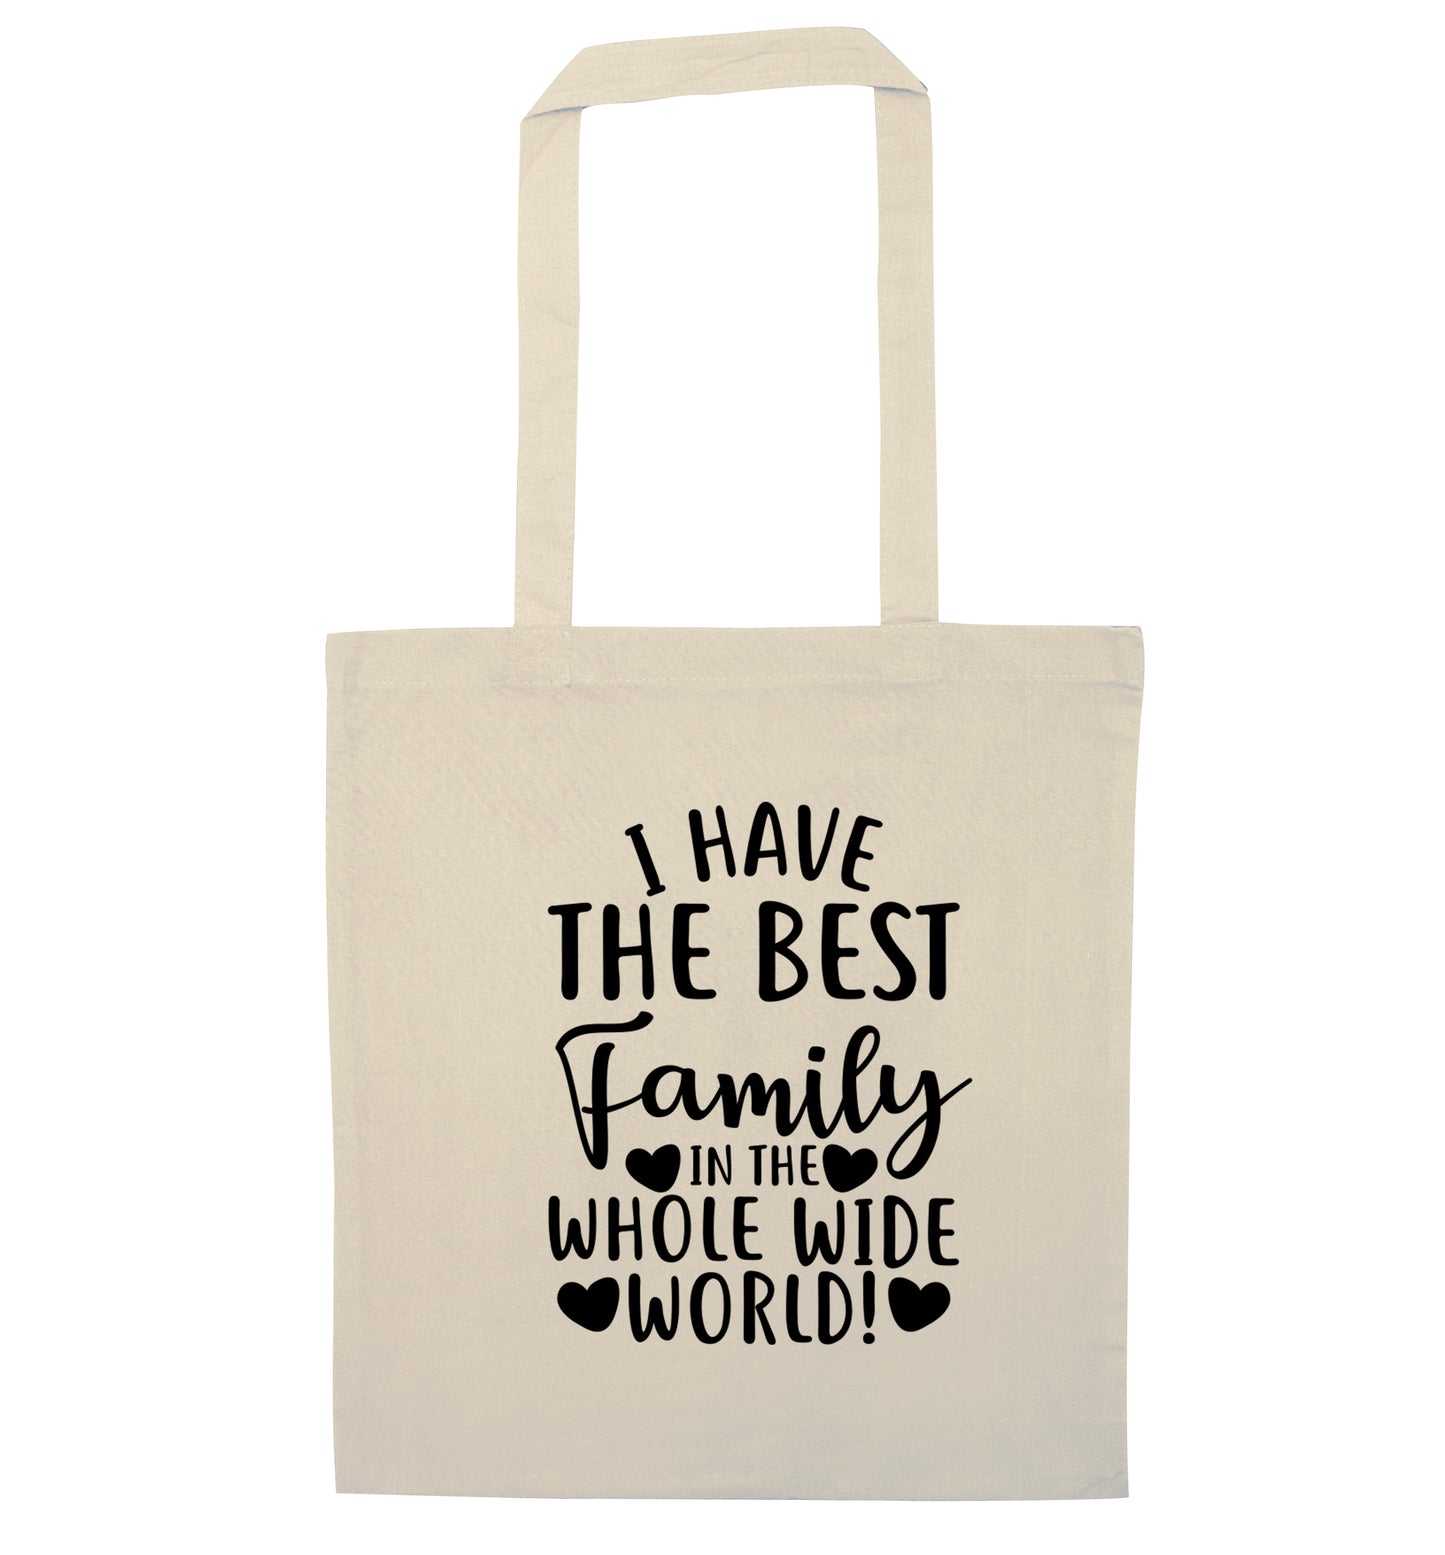 I have the best family in the whole wide world! natural tote bag